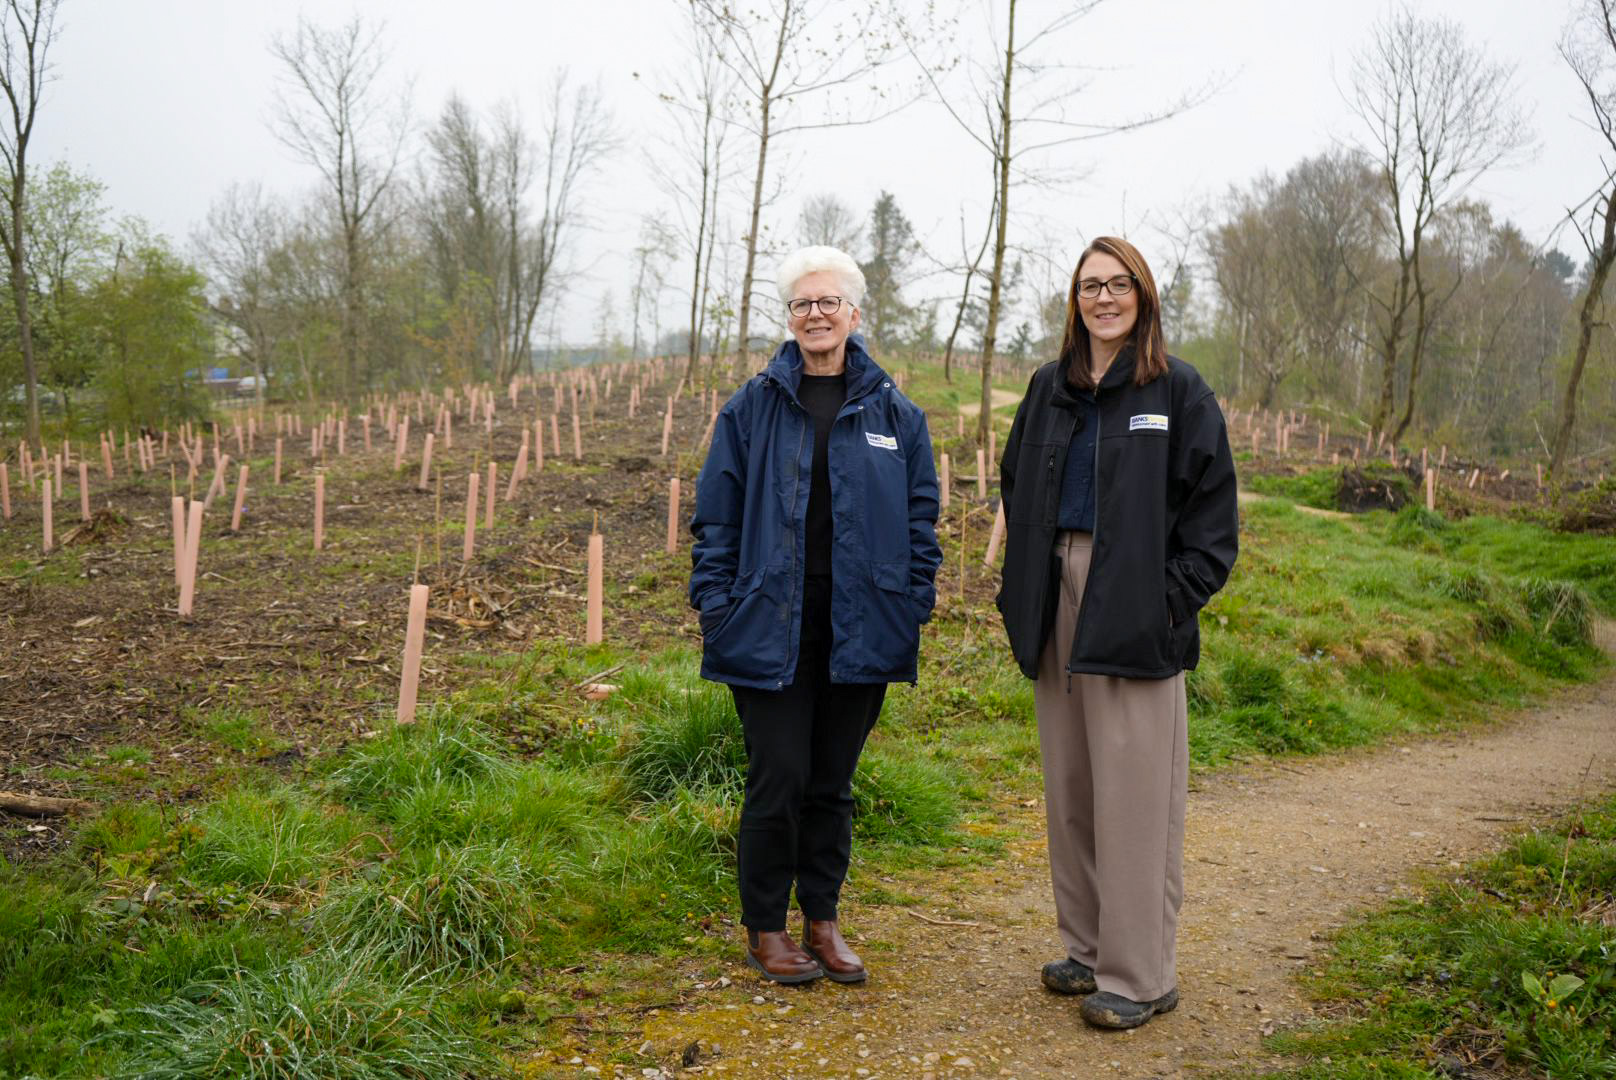 Kate Culverhouse and Louise Harrison of the Banks Group at the Oakenshaw Wildlife Reserve